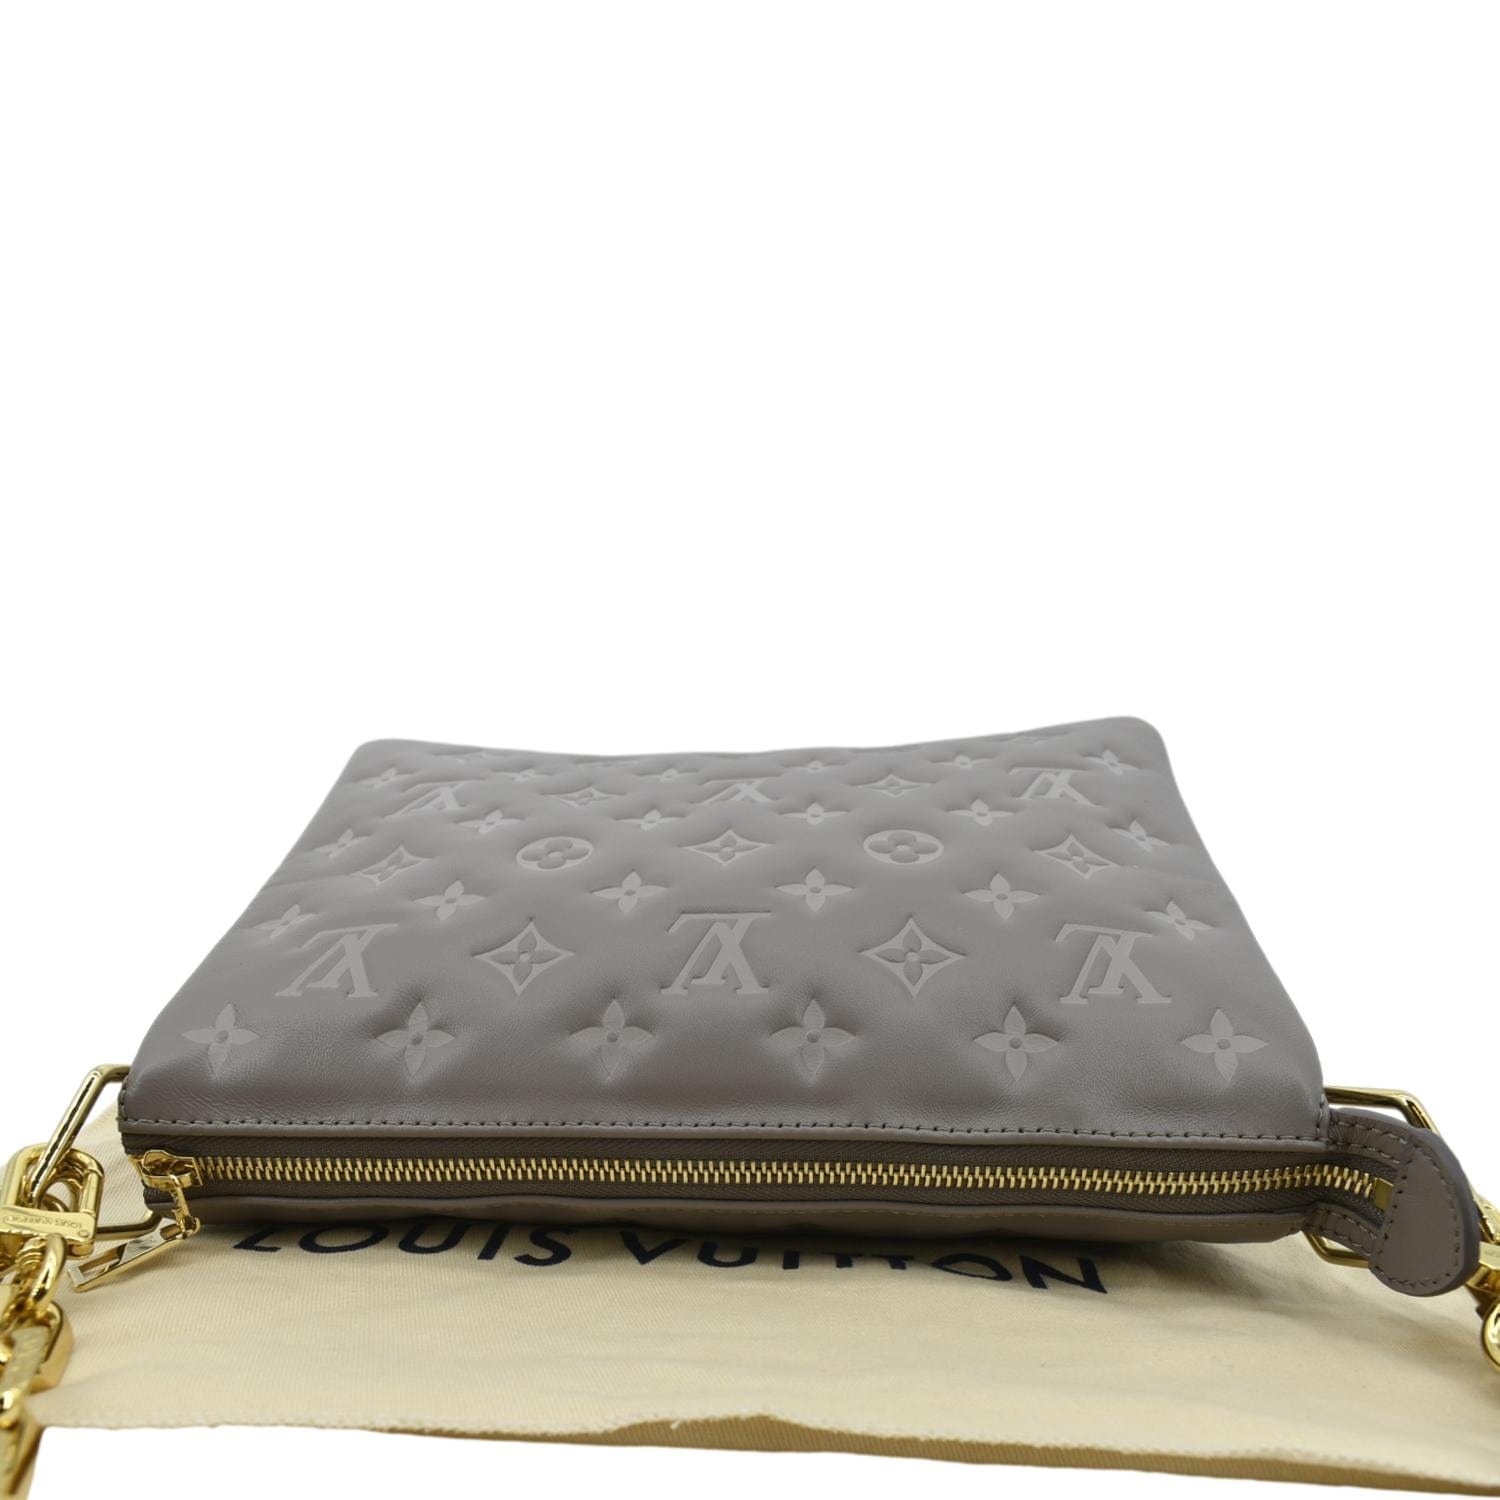 Louis Vuitton Coussin PM Glazed Black in Calfskin Leather with